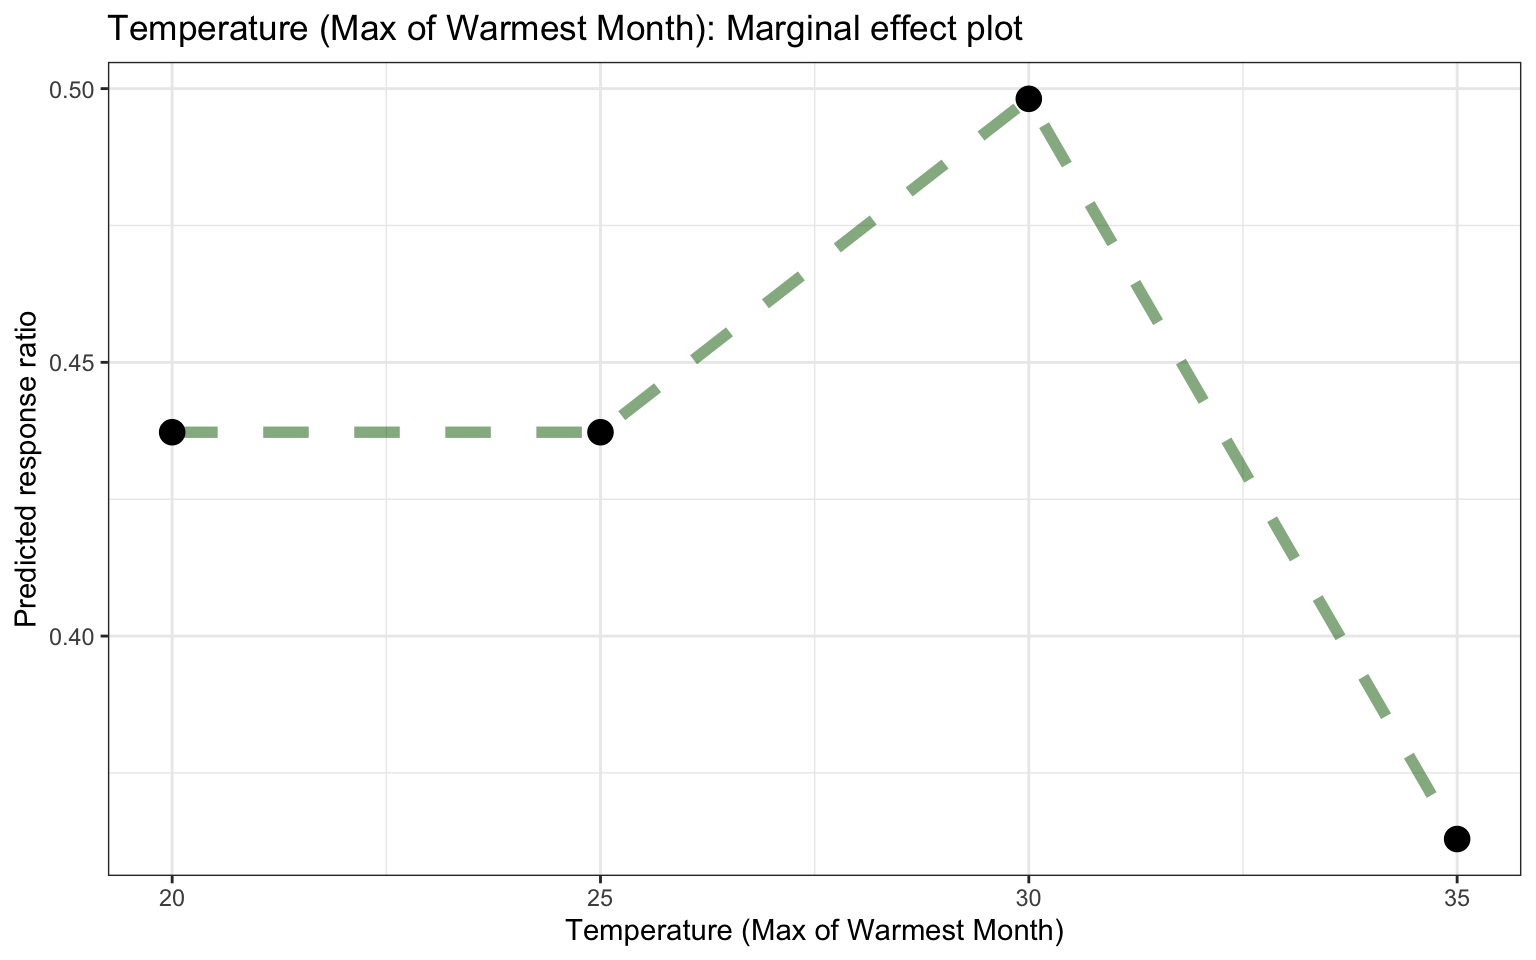 Marginal effects plot for temperature of warmest month based on the RF model